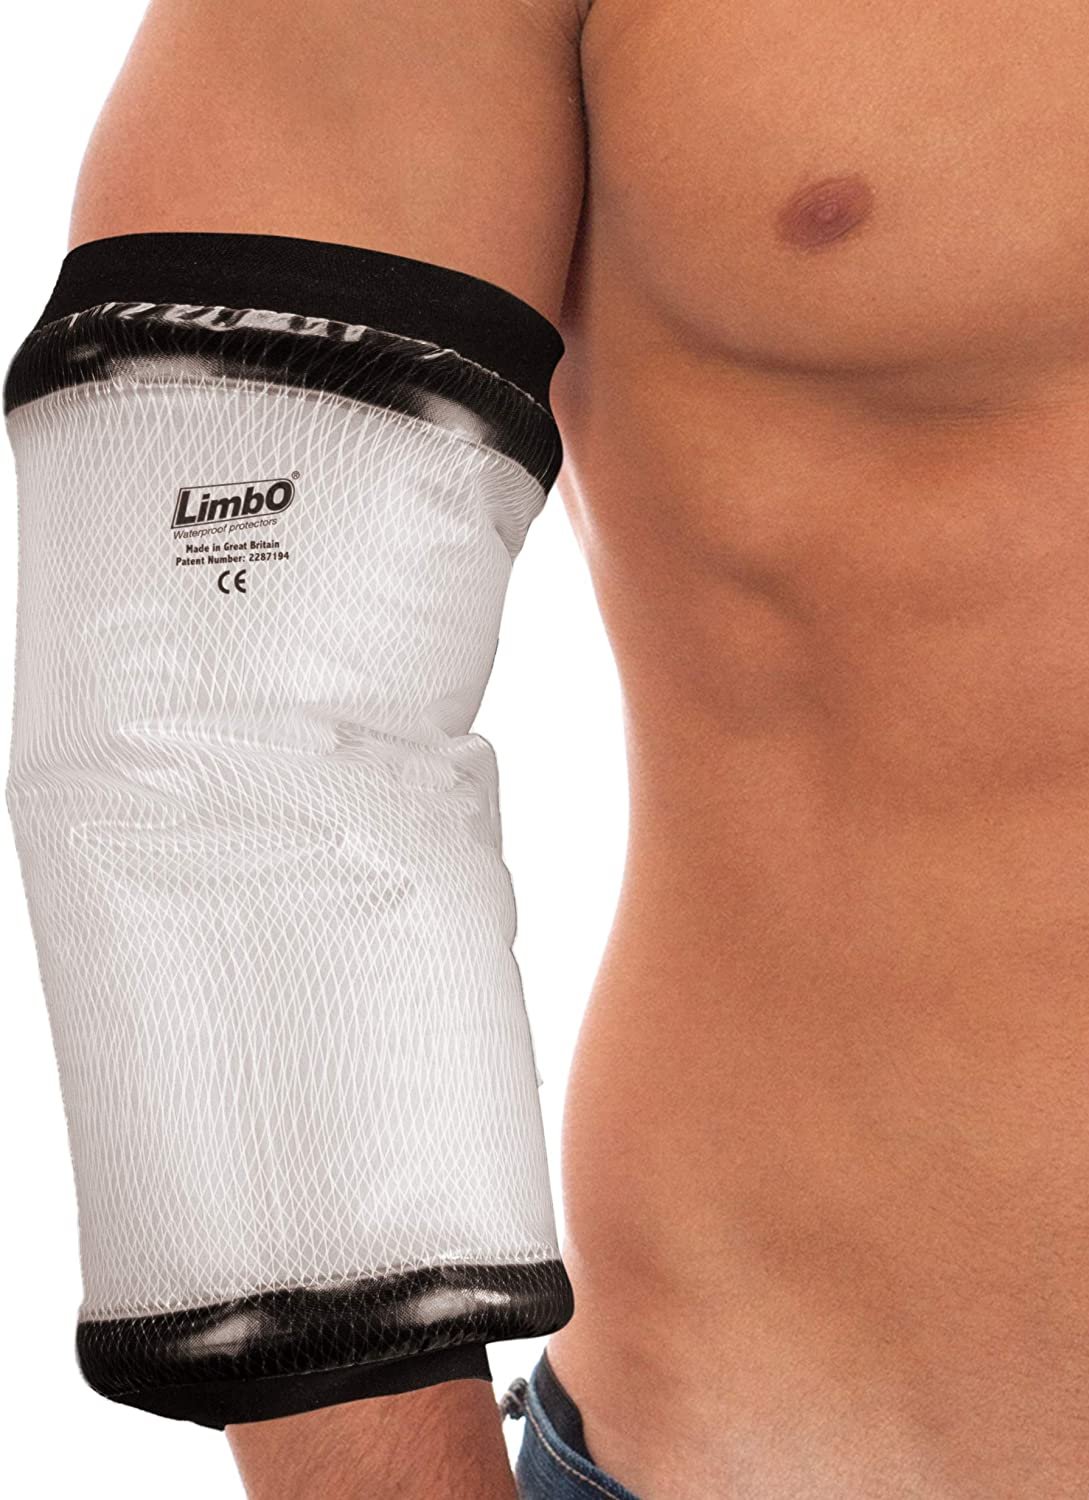 Limbo Waterproof Cast and Dressing Protector 